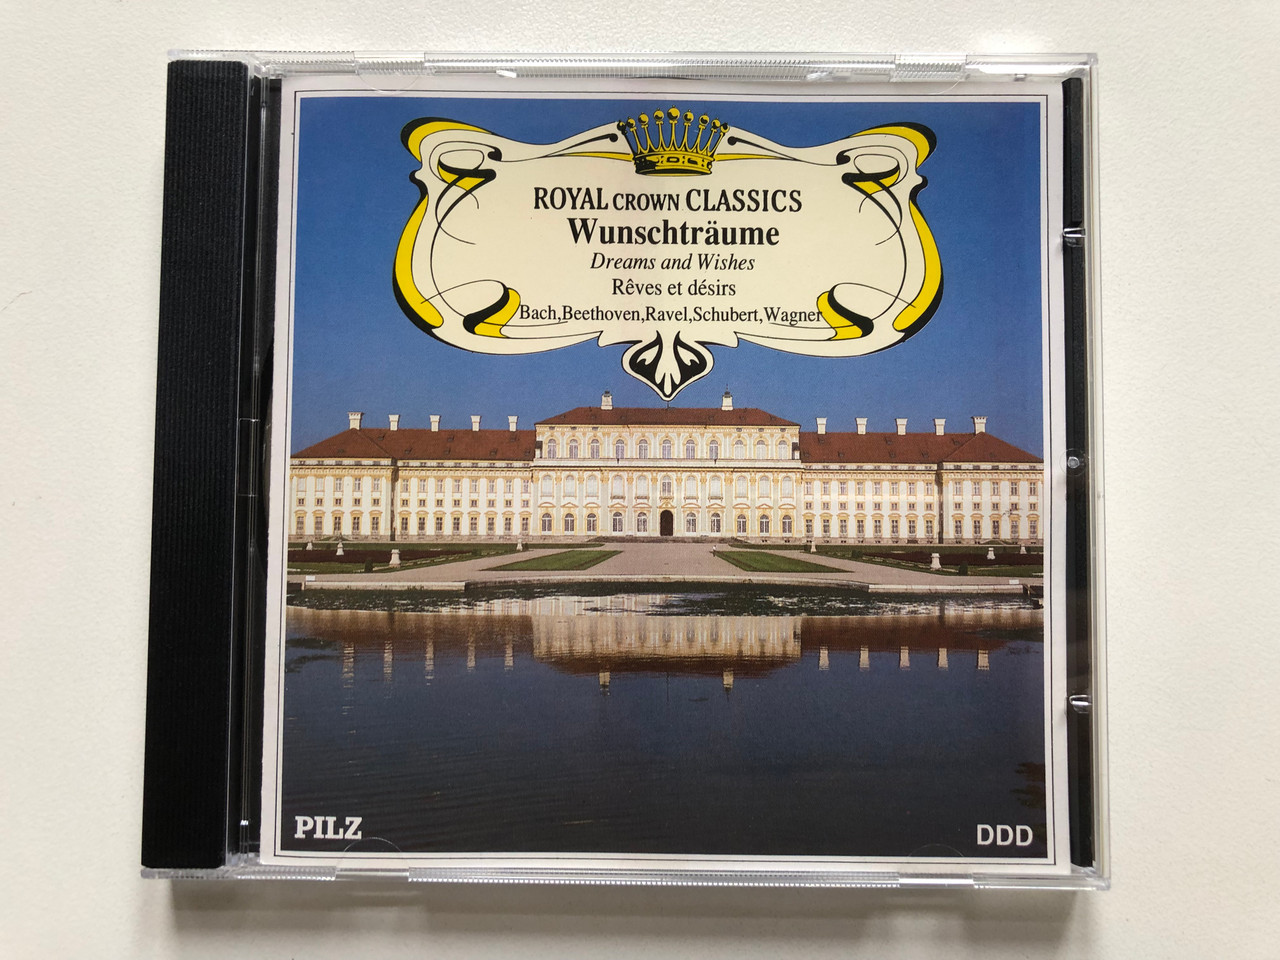 https://cdn10.bigcommerce.com/s-62bdpkt7pb/products/0/images/307715/Royal_Crown_Classics_Wunschtraume._Dreams_and_Wishes._Reves_et_desirs_-_Bach_Beethoven_Ravel_Schubert_Wagner_Pilz_Audio_CD_CD_65029_1__96354.1698823389.1280.1280.JPG?c=2